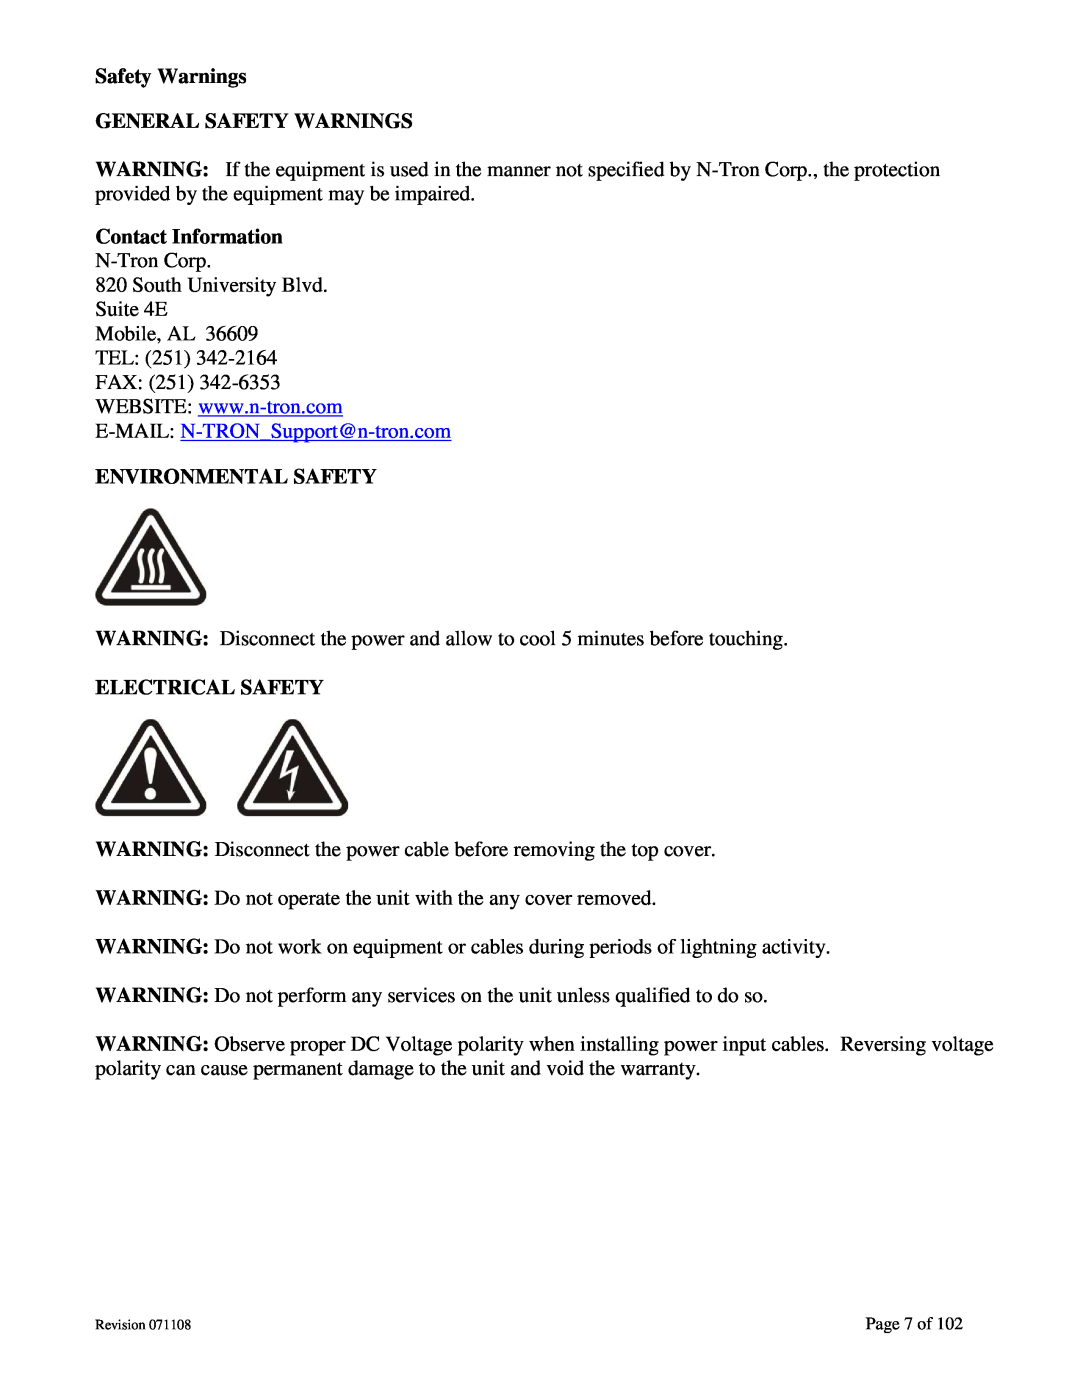 N-Tron 708M12 user manual Safety Warnings GENERAL SAFETY WARNINGS, Contact Information, E-MAIL N-TRONSupport@n-tron.com 